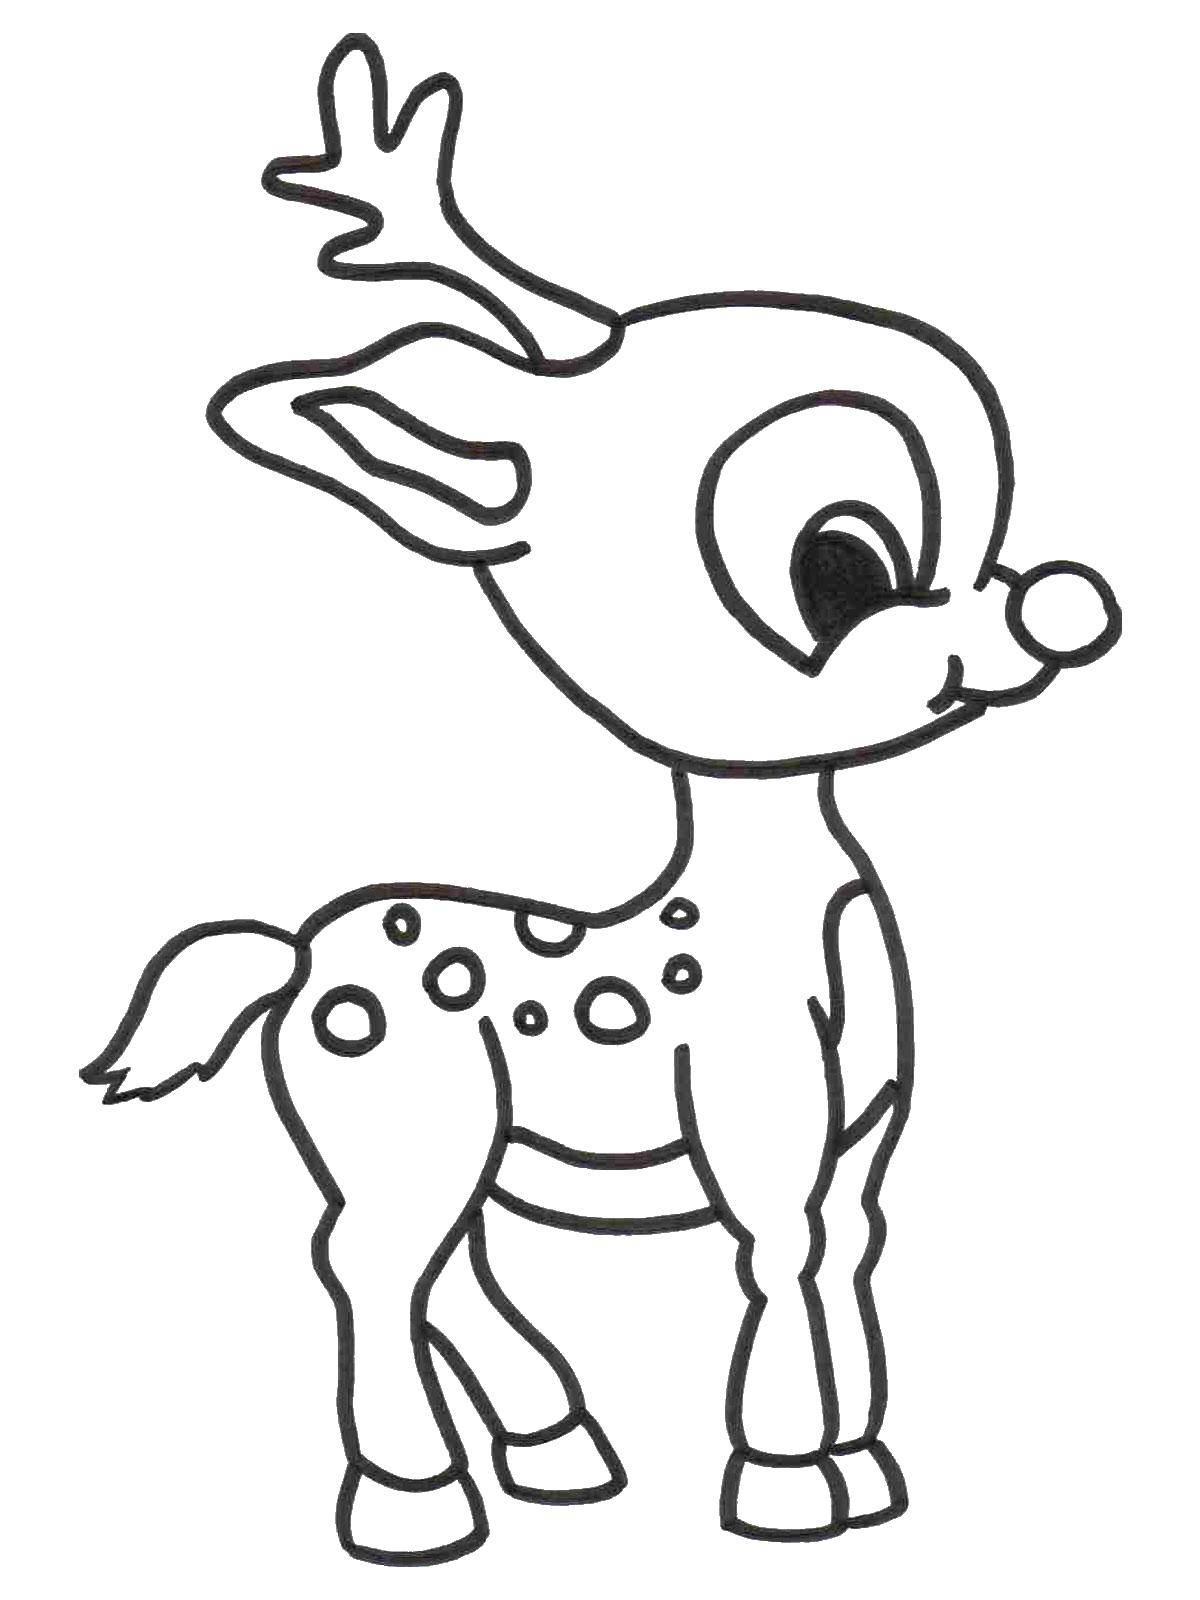 Coloring Fawn. Category animals. Tags:  fawn, horns, animals.